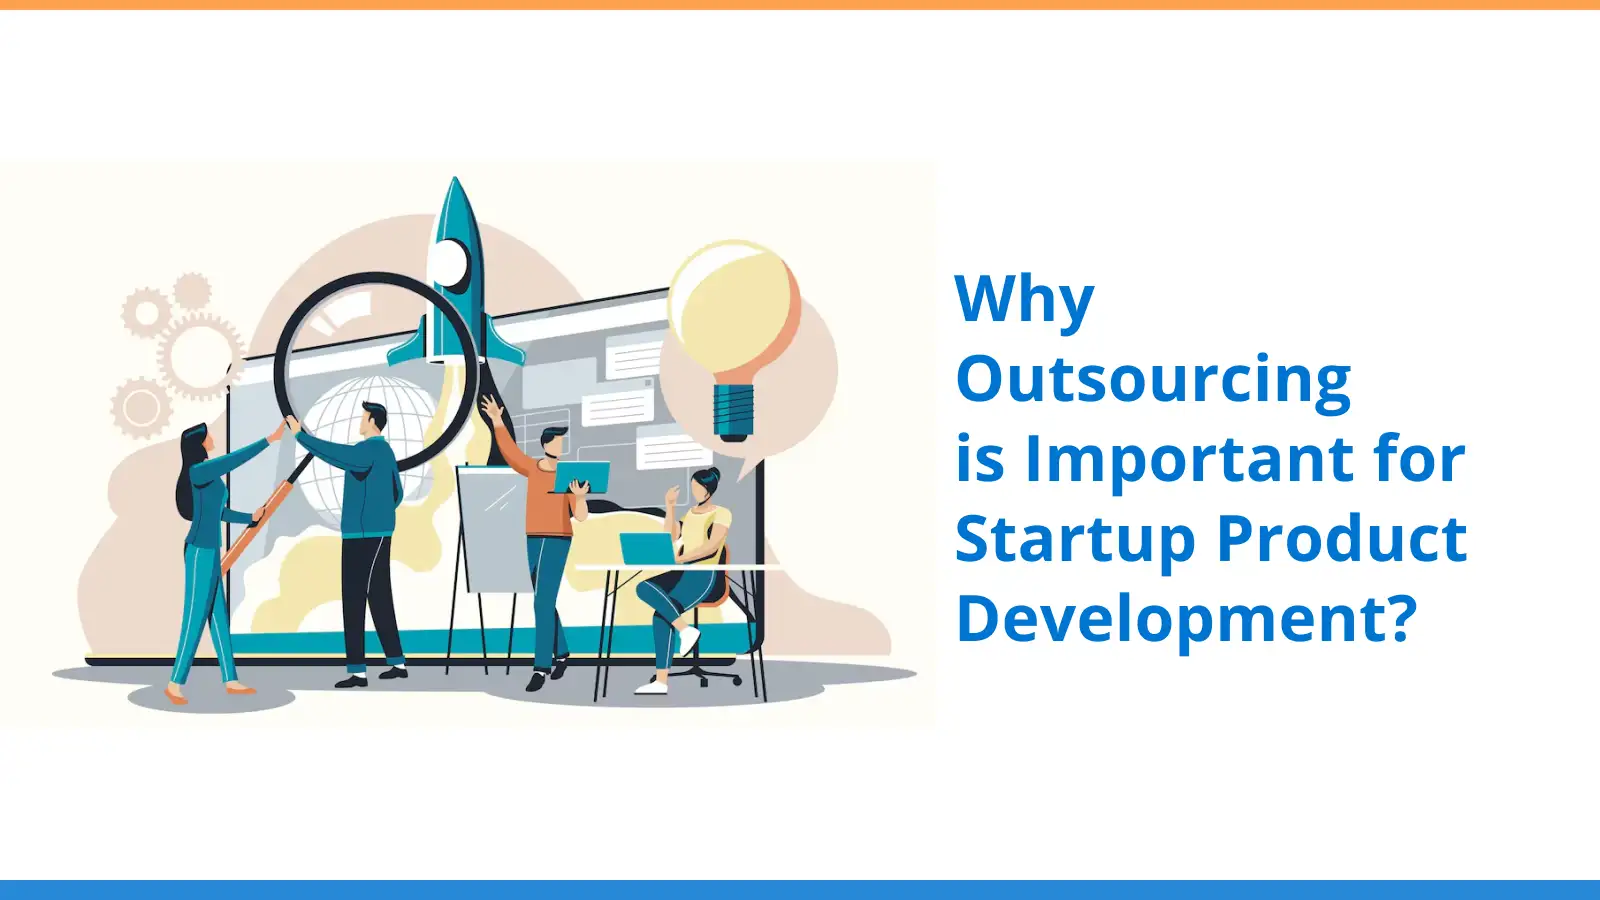 How Outsourcing Product Development Can Propel Your Growth